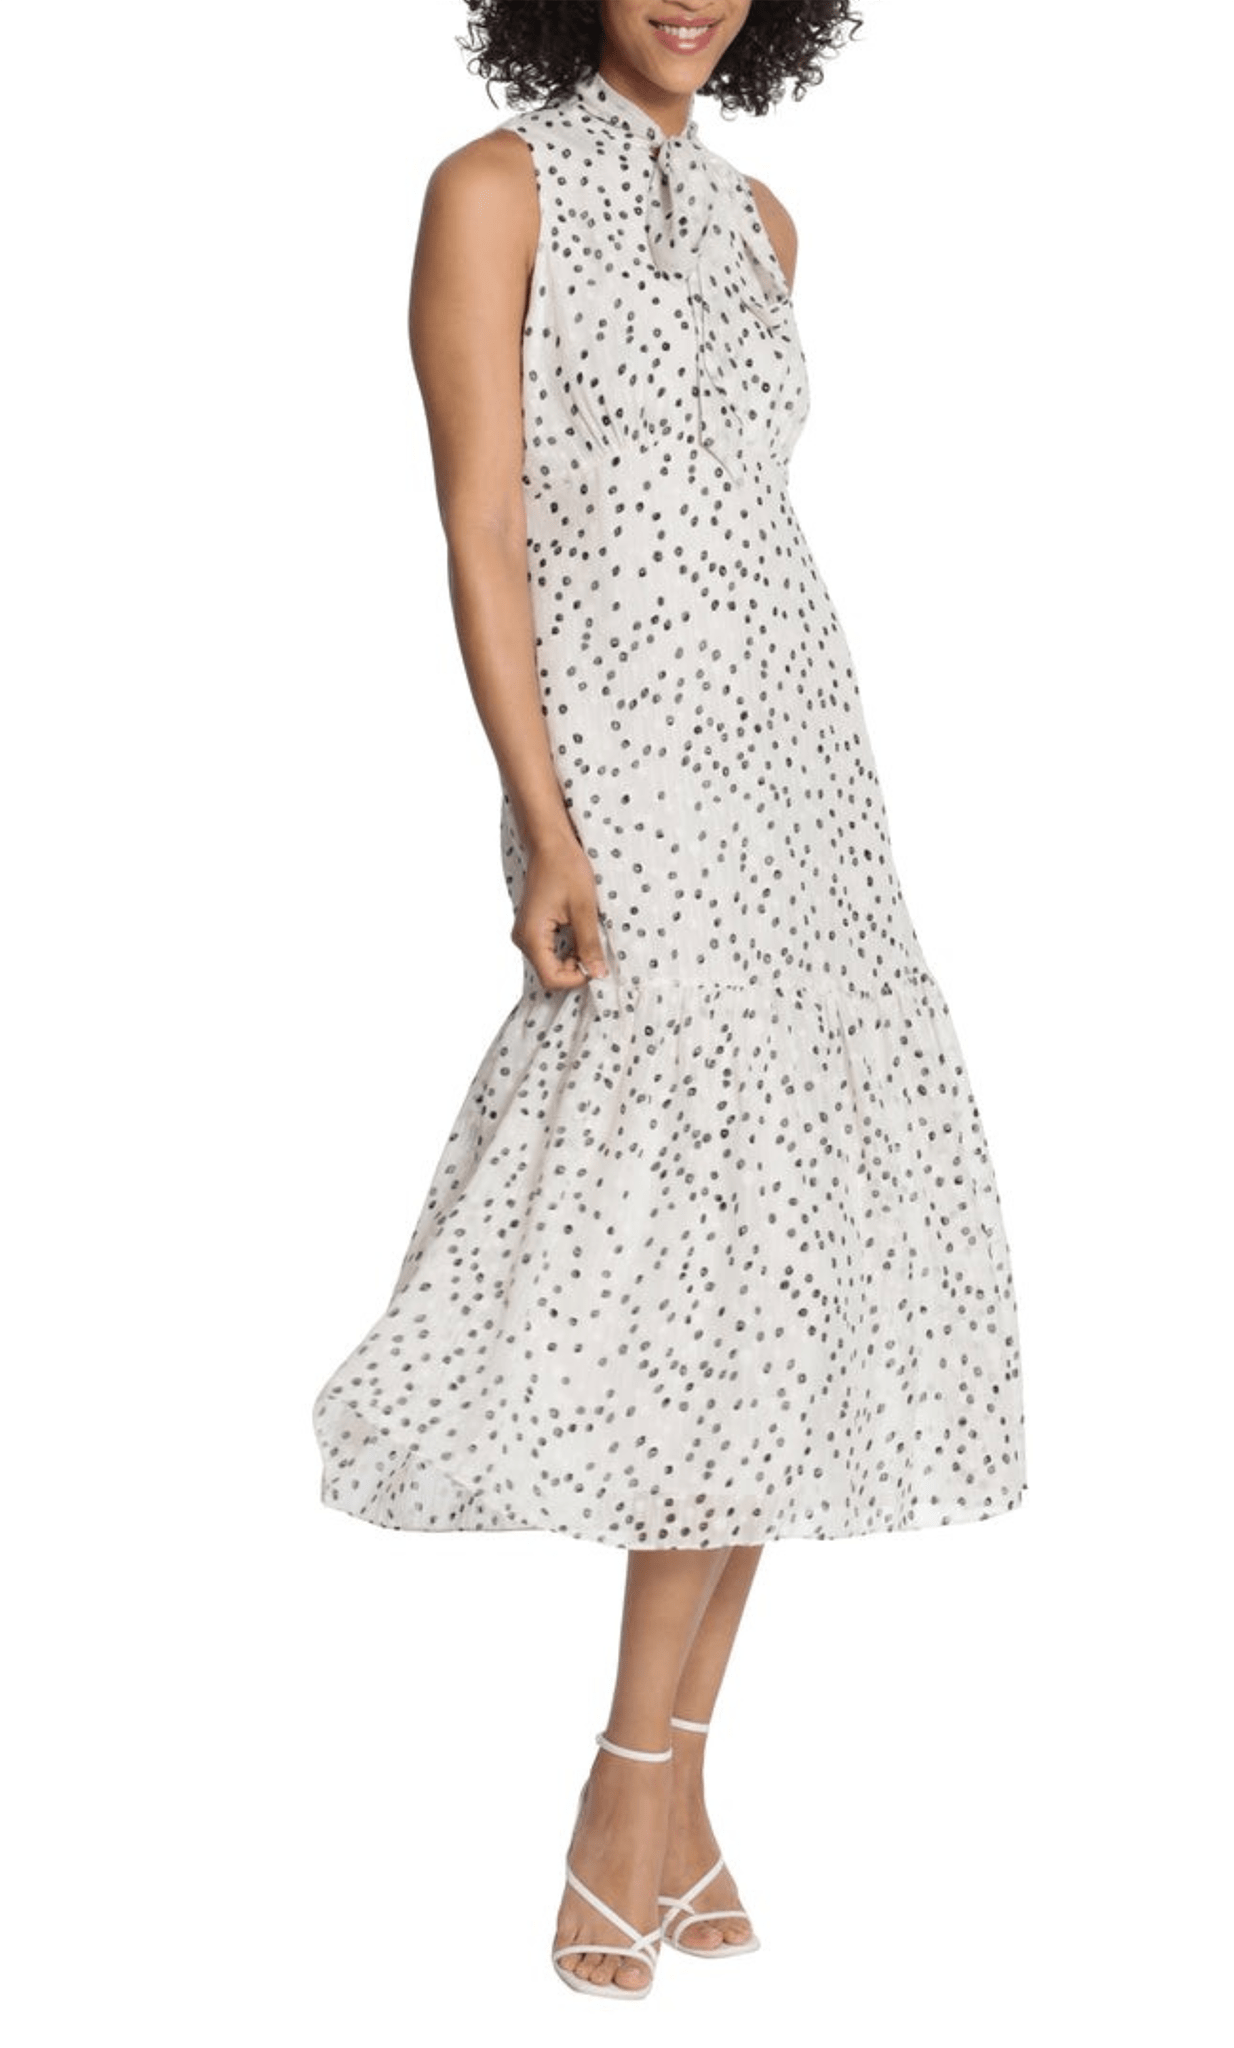 Maggy London G5287M - Polka Dotted Sleeveless Dress Special Occasion Dress 0 / Ivory Black